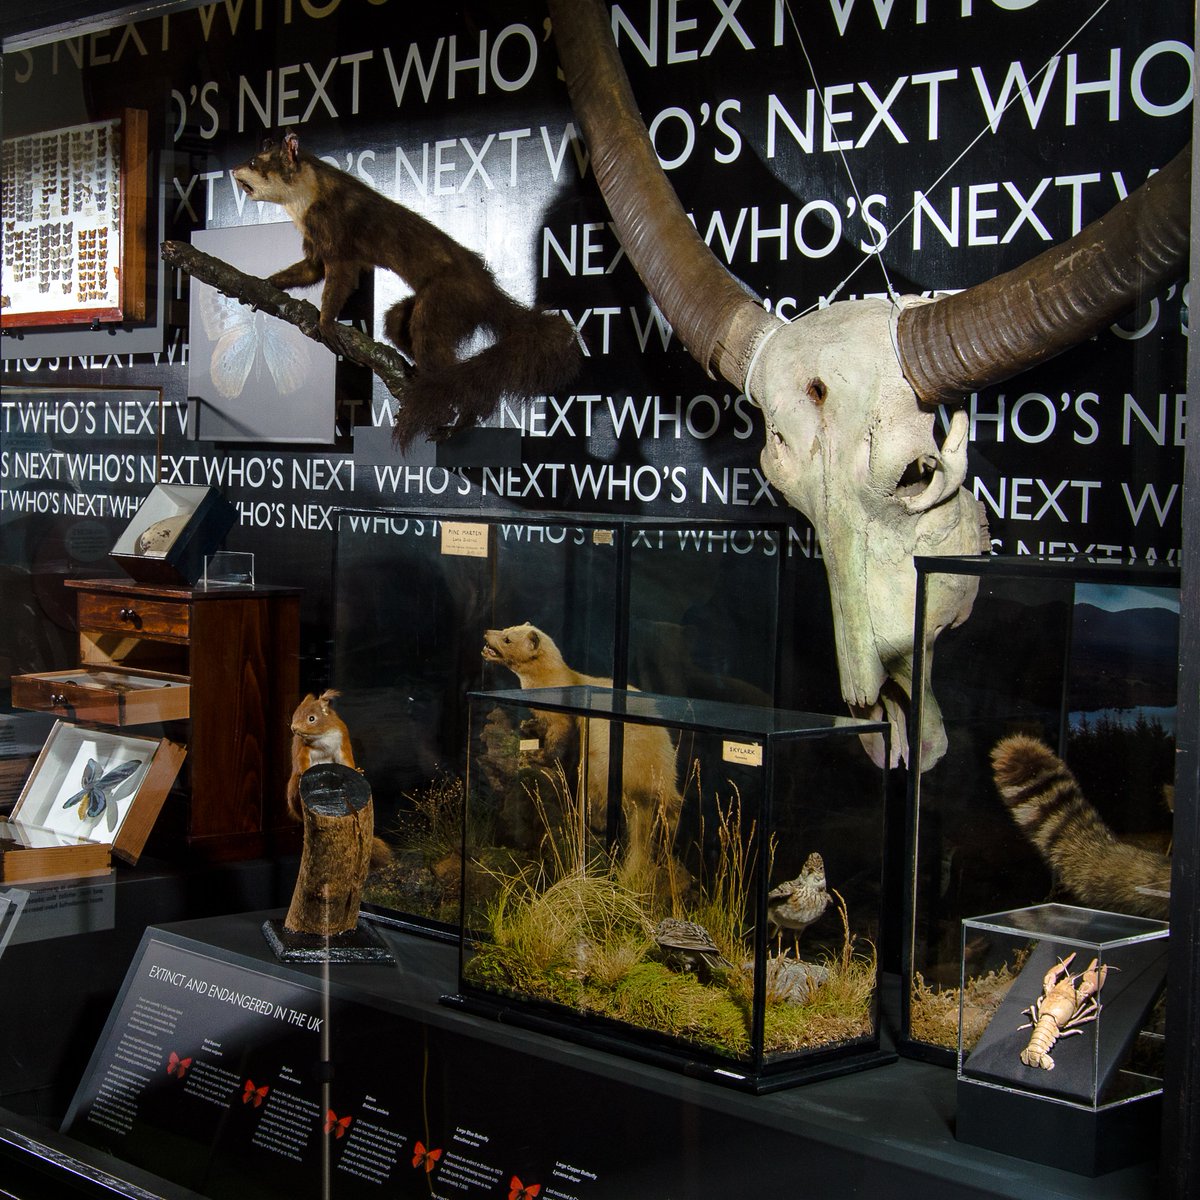 On Endangered Species Day, let's raise awareness about some native and non-native species in our collection that are currently at risk. 
#endangeredspeciesday #naturalhistory #museums #cumbriantourism #visitcumbria